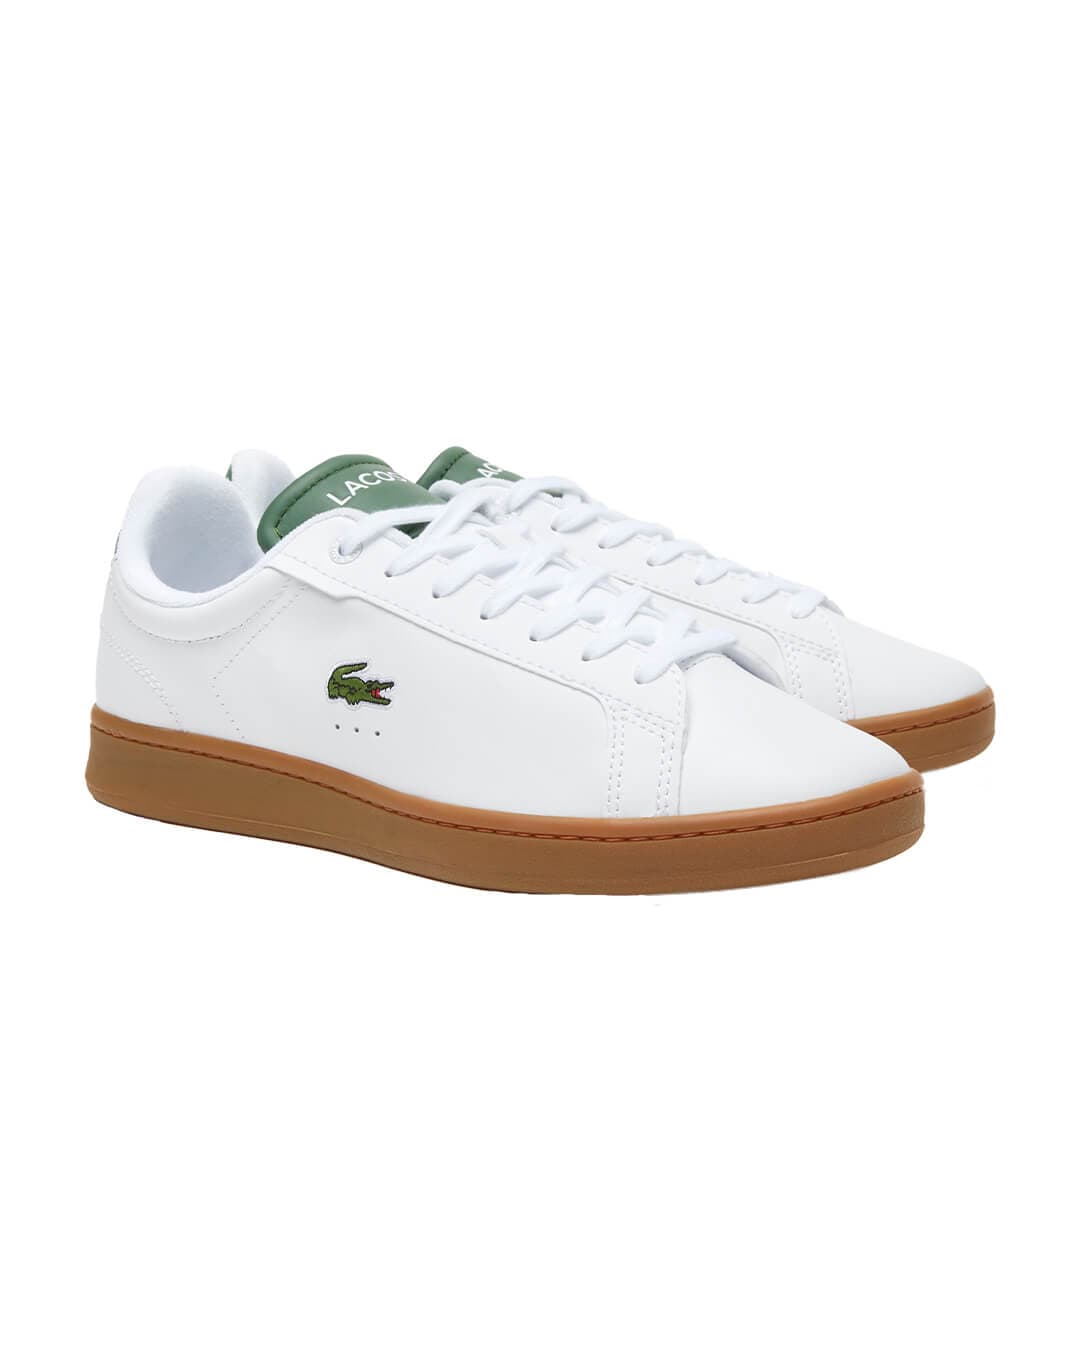 Lacoste Shoes Lacoste Carnaby Pro Leather Plain White Sneakers